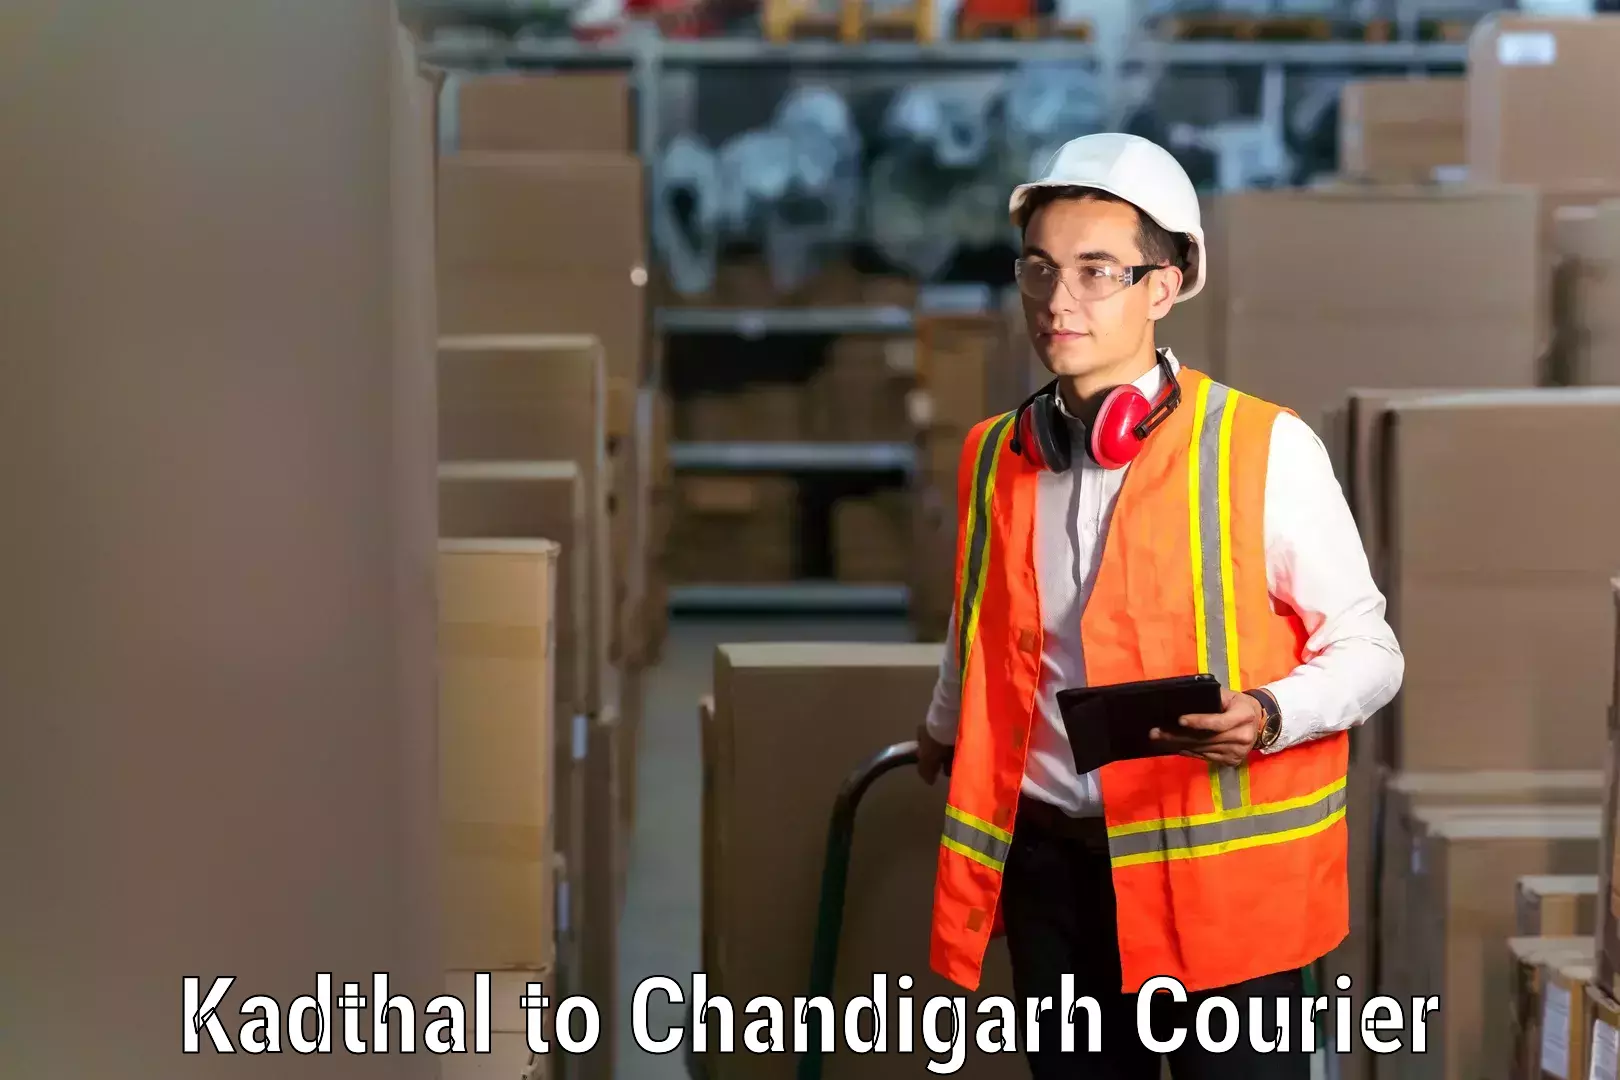 Household transport experts Kadthal to Chandigarh